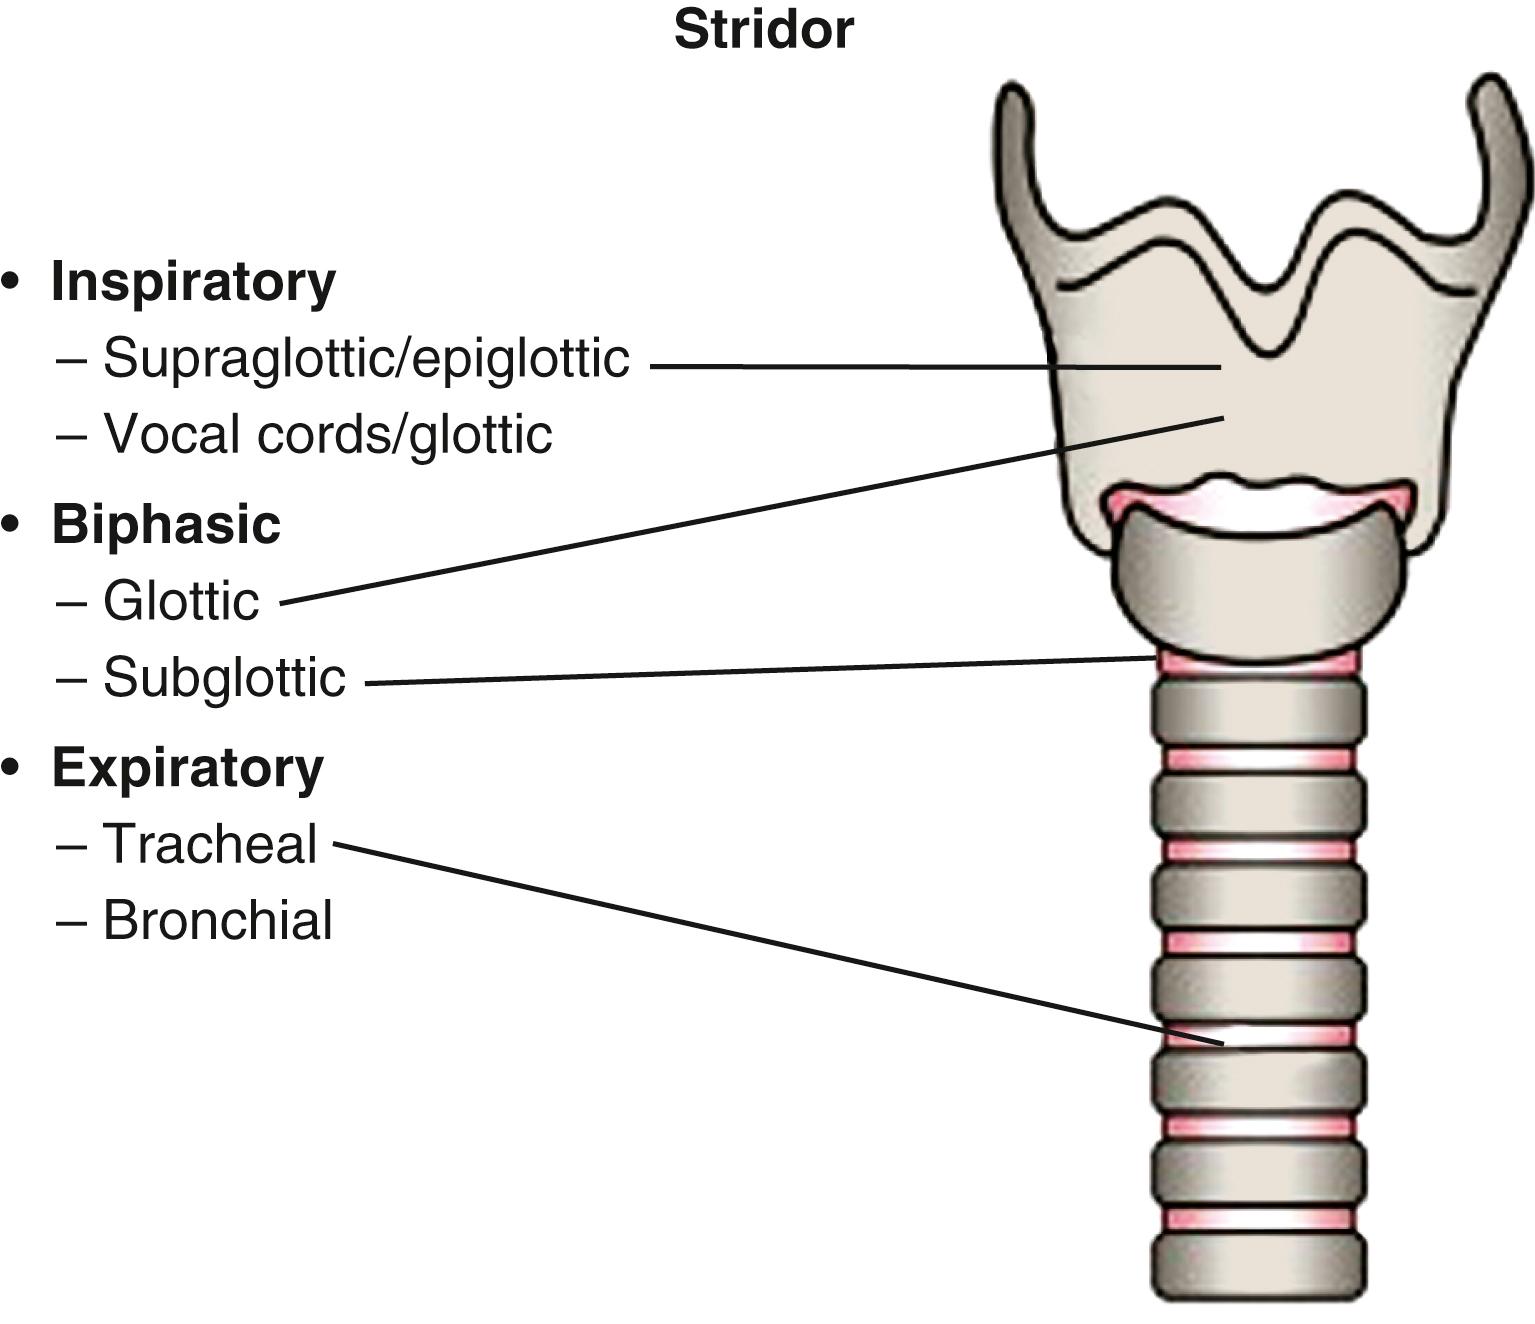 Fig. 4.1, Stridor. Inspiratory stridor is characteristic of partial airway obstruction at or above the vocal cords (supraglottic/epiglottic and glottis areas). Biphasic stridor is characteristic at the glottis or subglottic areas, and is typically caused by a fixed obstruction. Expiratory stridor is characteristic of a high tracheal lesion as there is a decrease in airway diameter with expiration.